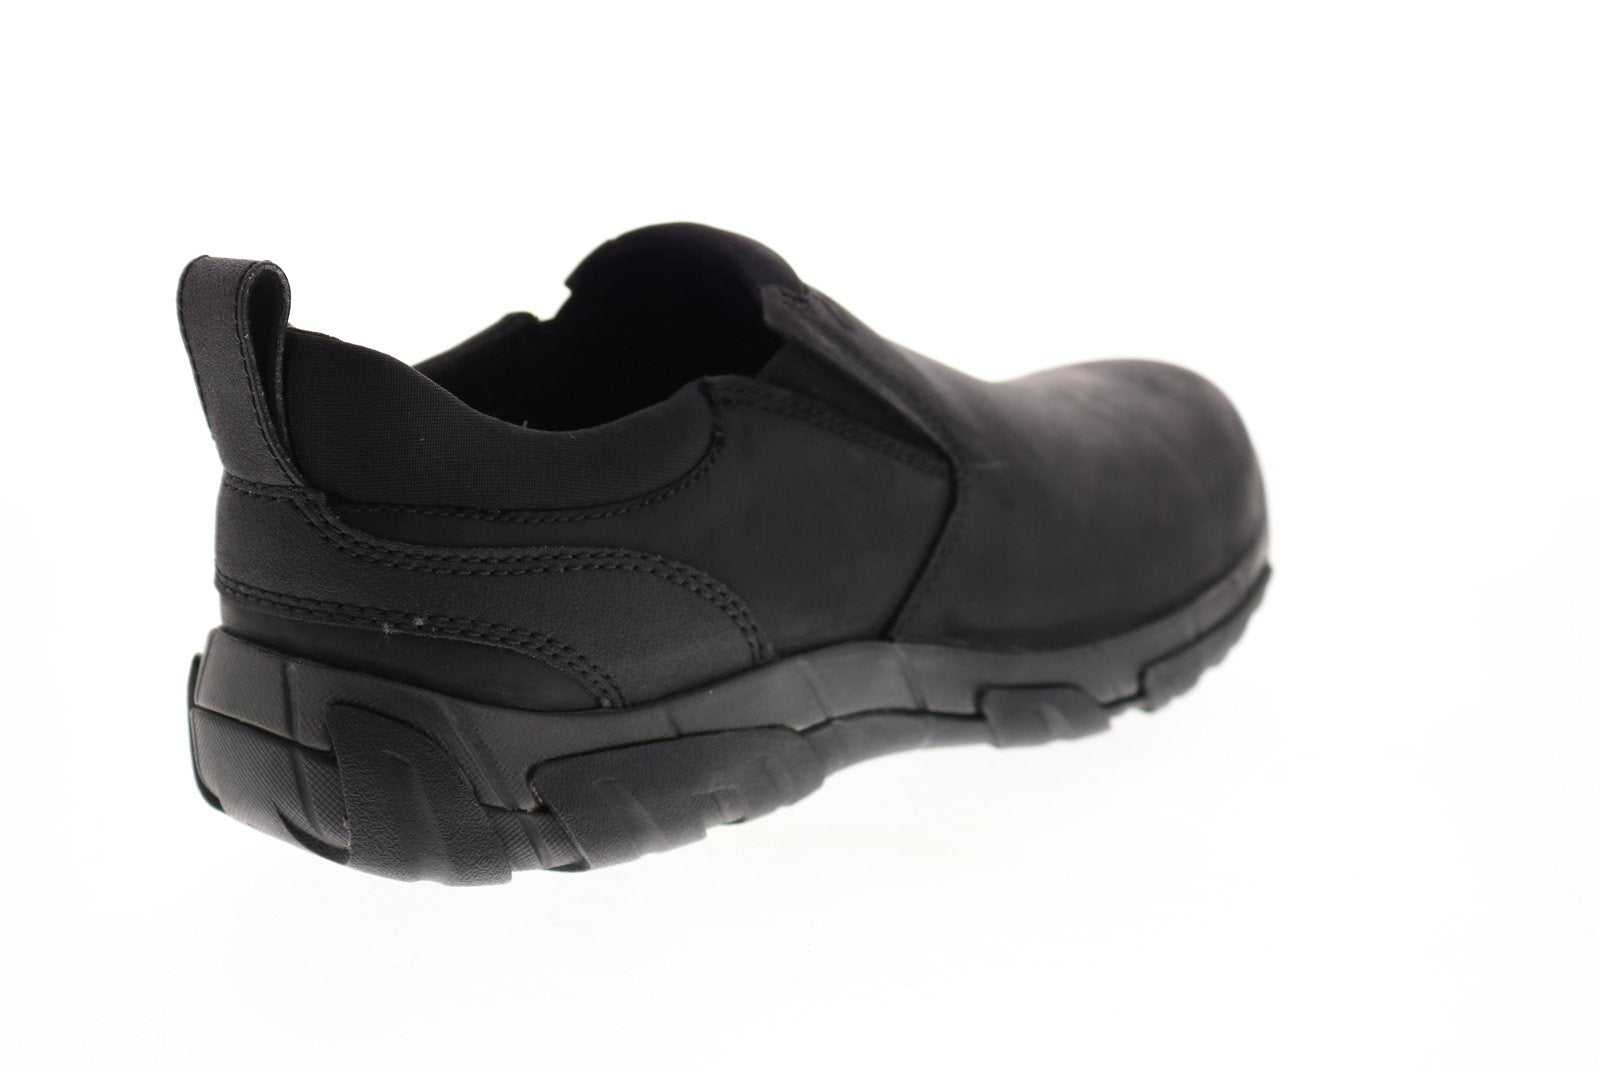 Clarks Work Work & Safety Shoes for Men